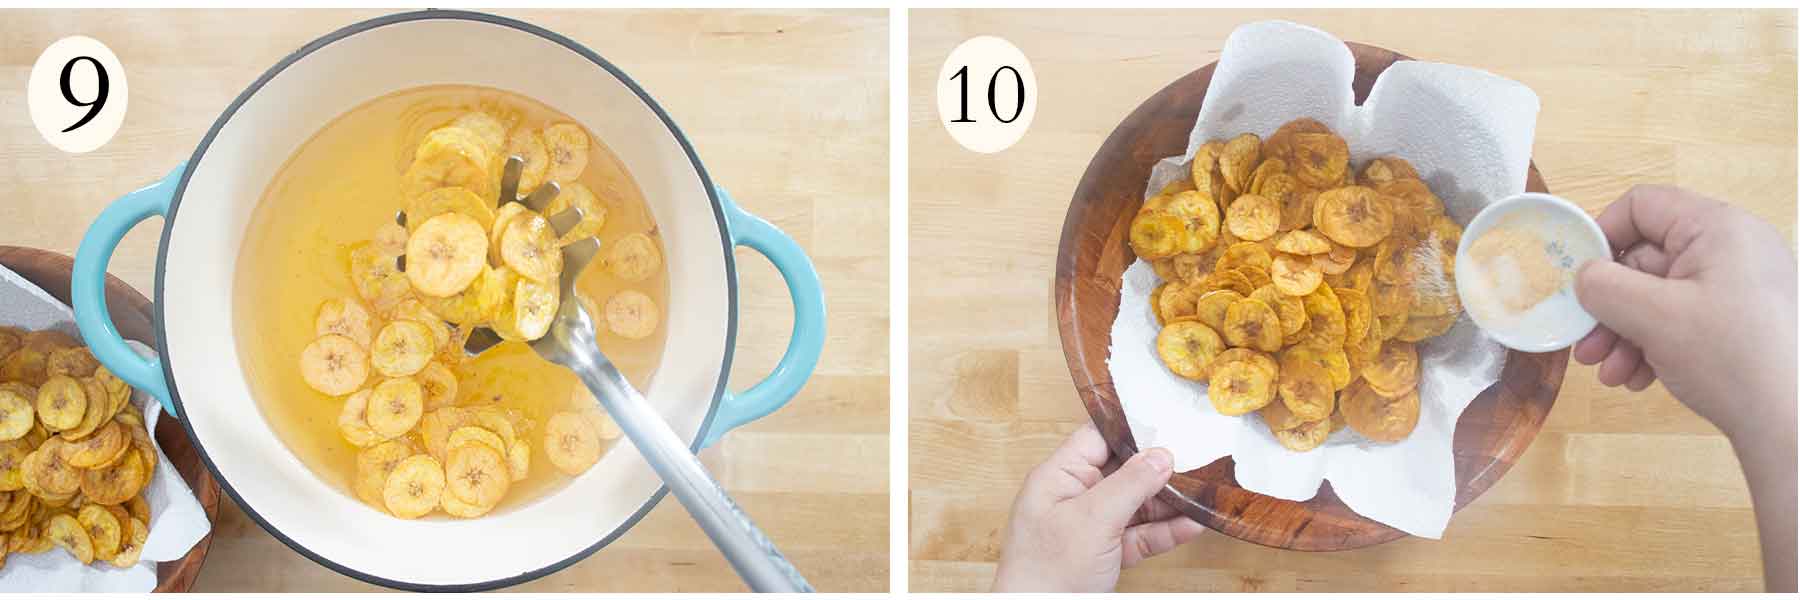 steps 9 and 10 on how to make platanutres or plantain chips.